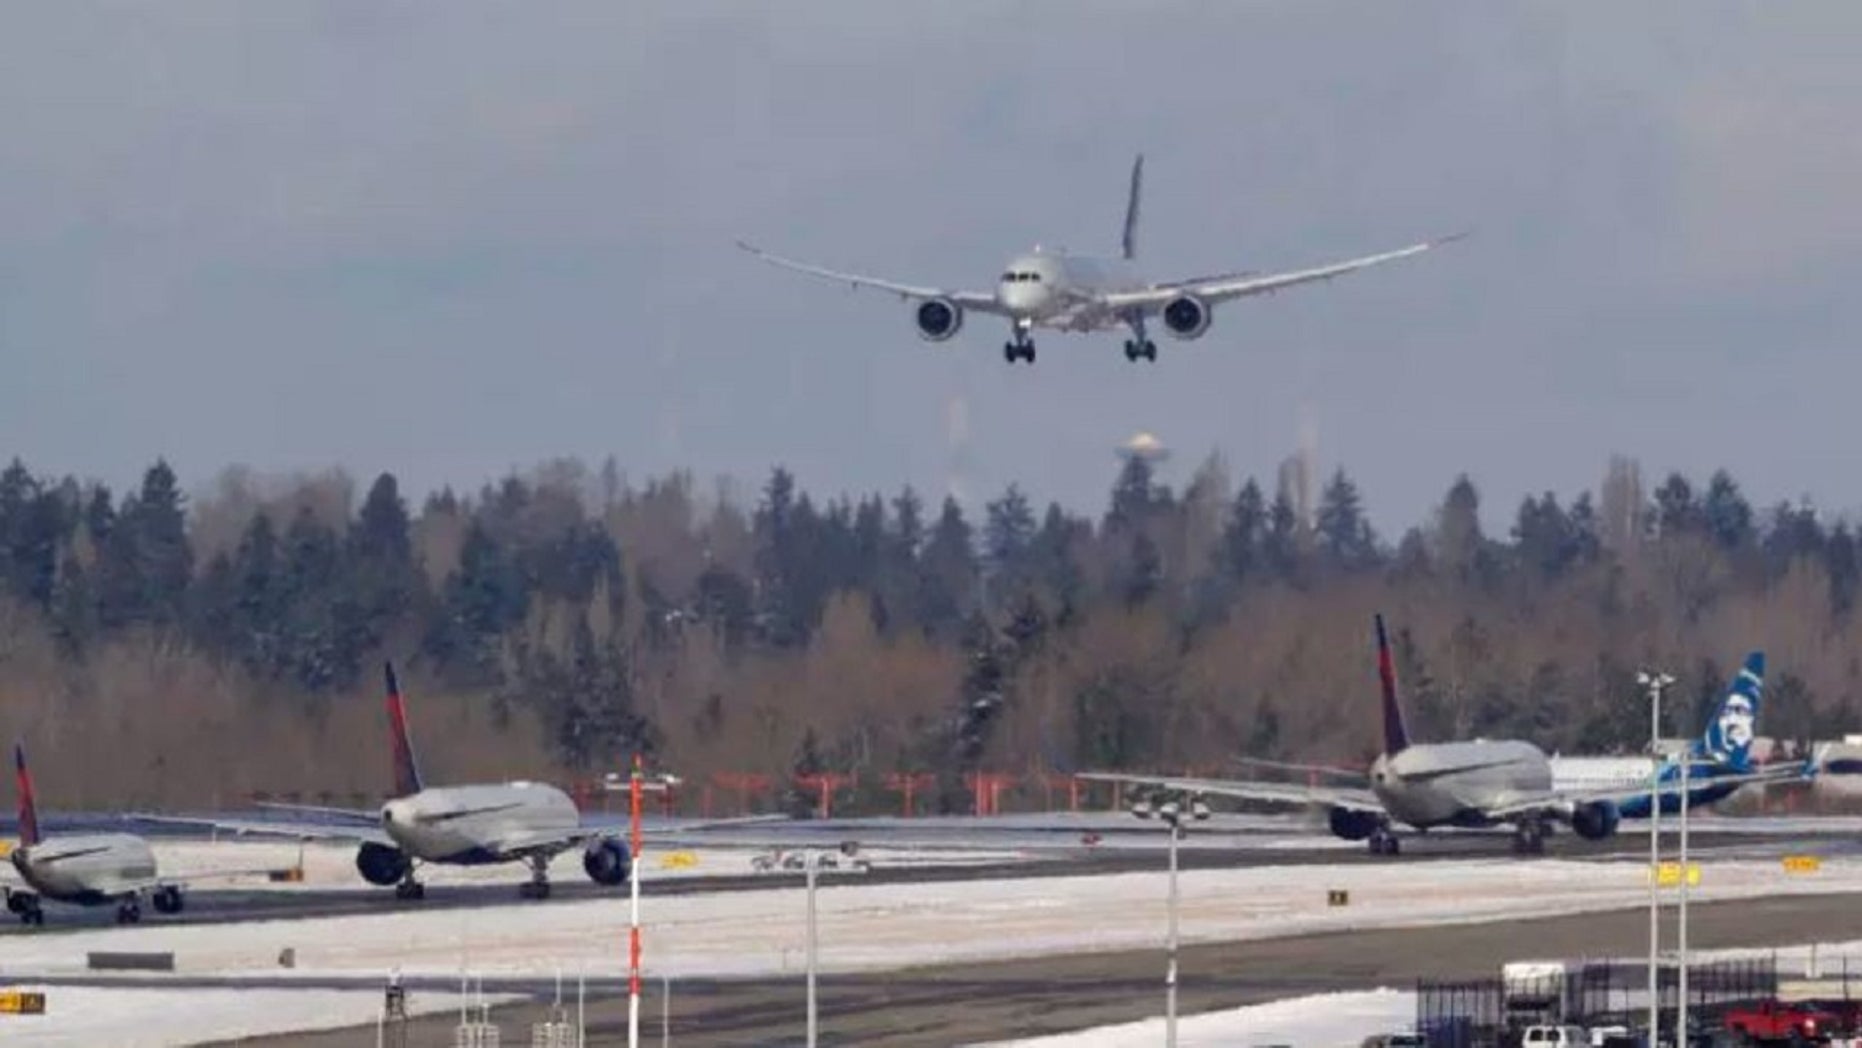 February 5: A Virgin Atlantic flight arrives for a landing over another ground aircraft on Tuesday, February 5, 2019, at the Seattle-Tacoma International Airport in Seattle. (AP Photo / Ted S. Warren)